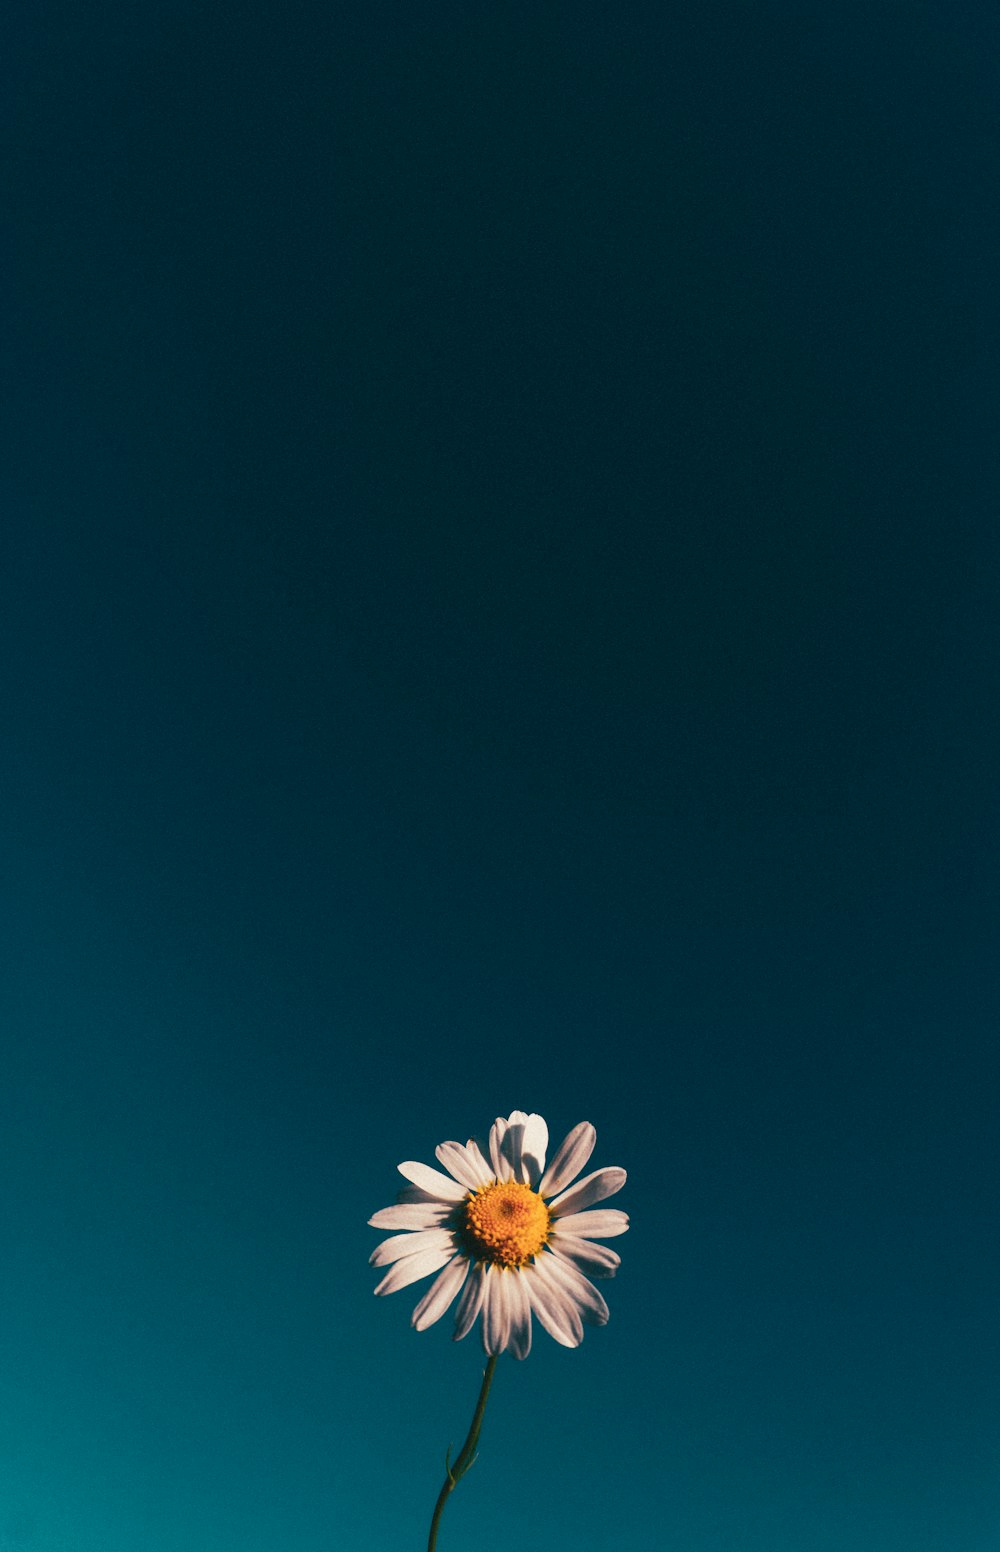 a single white flower with a blue sky in the background